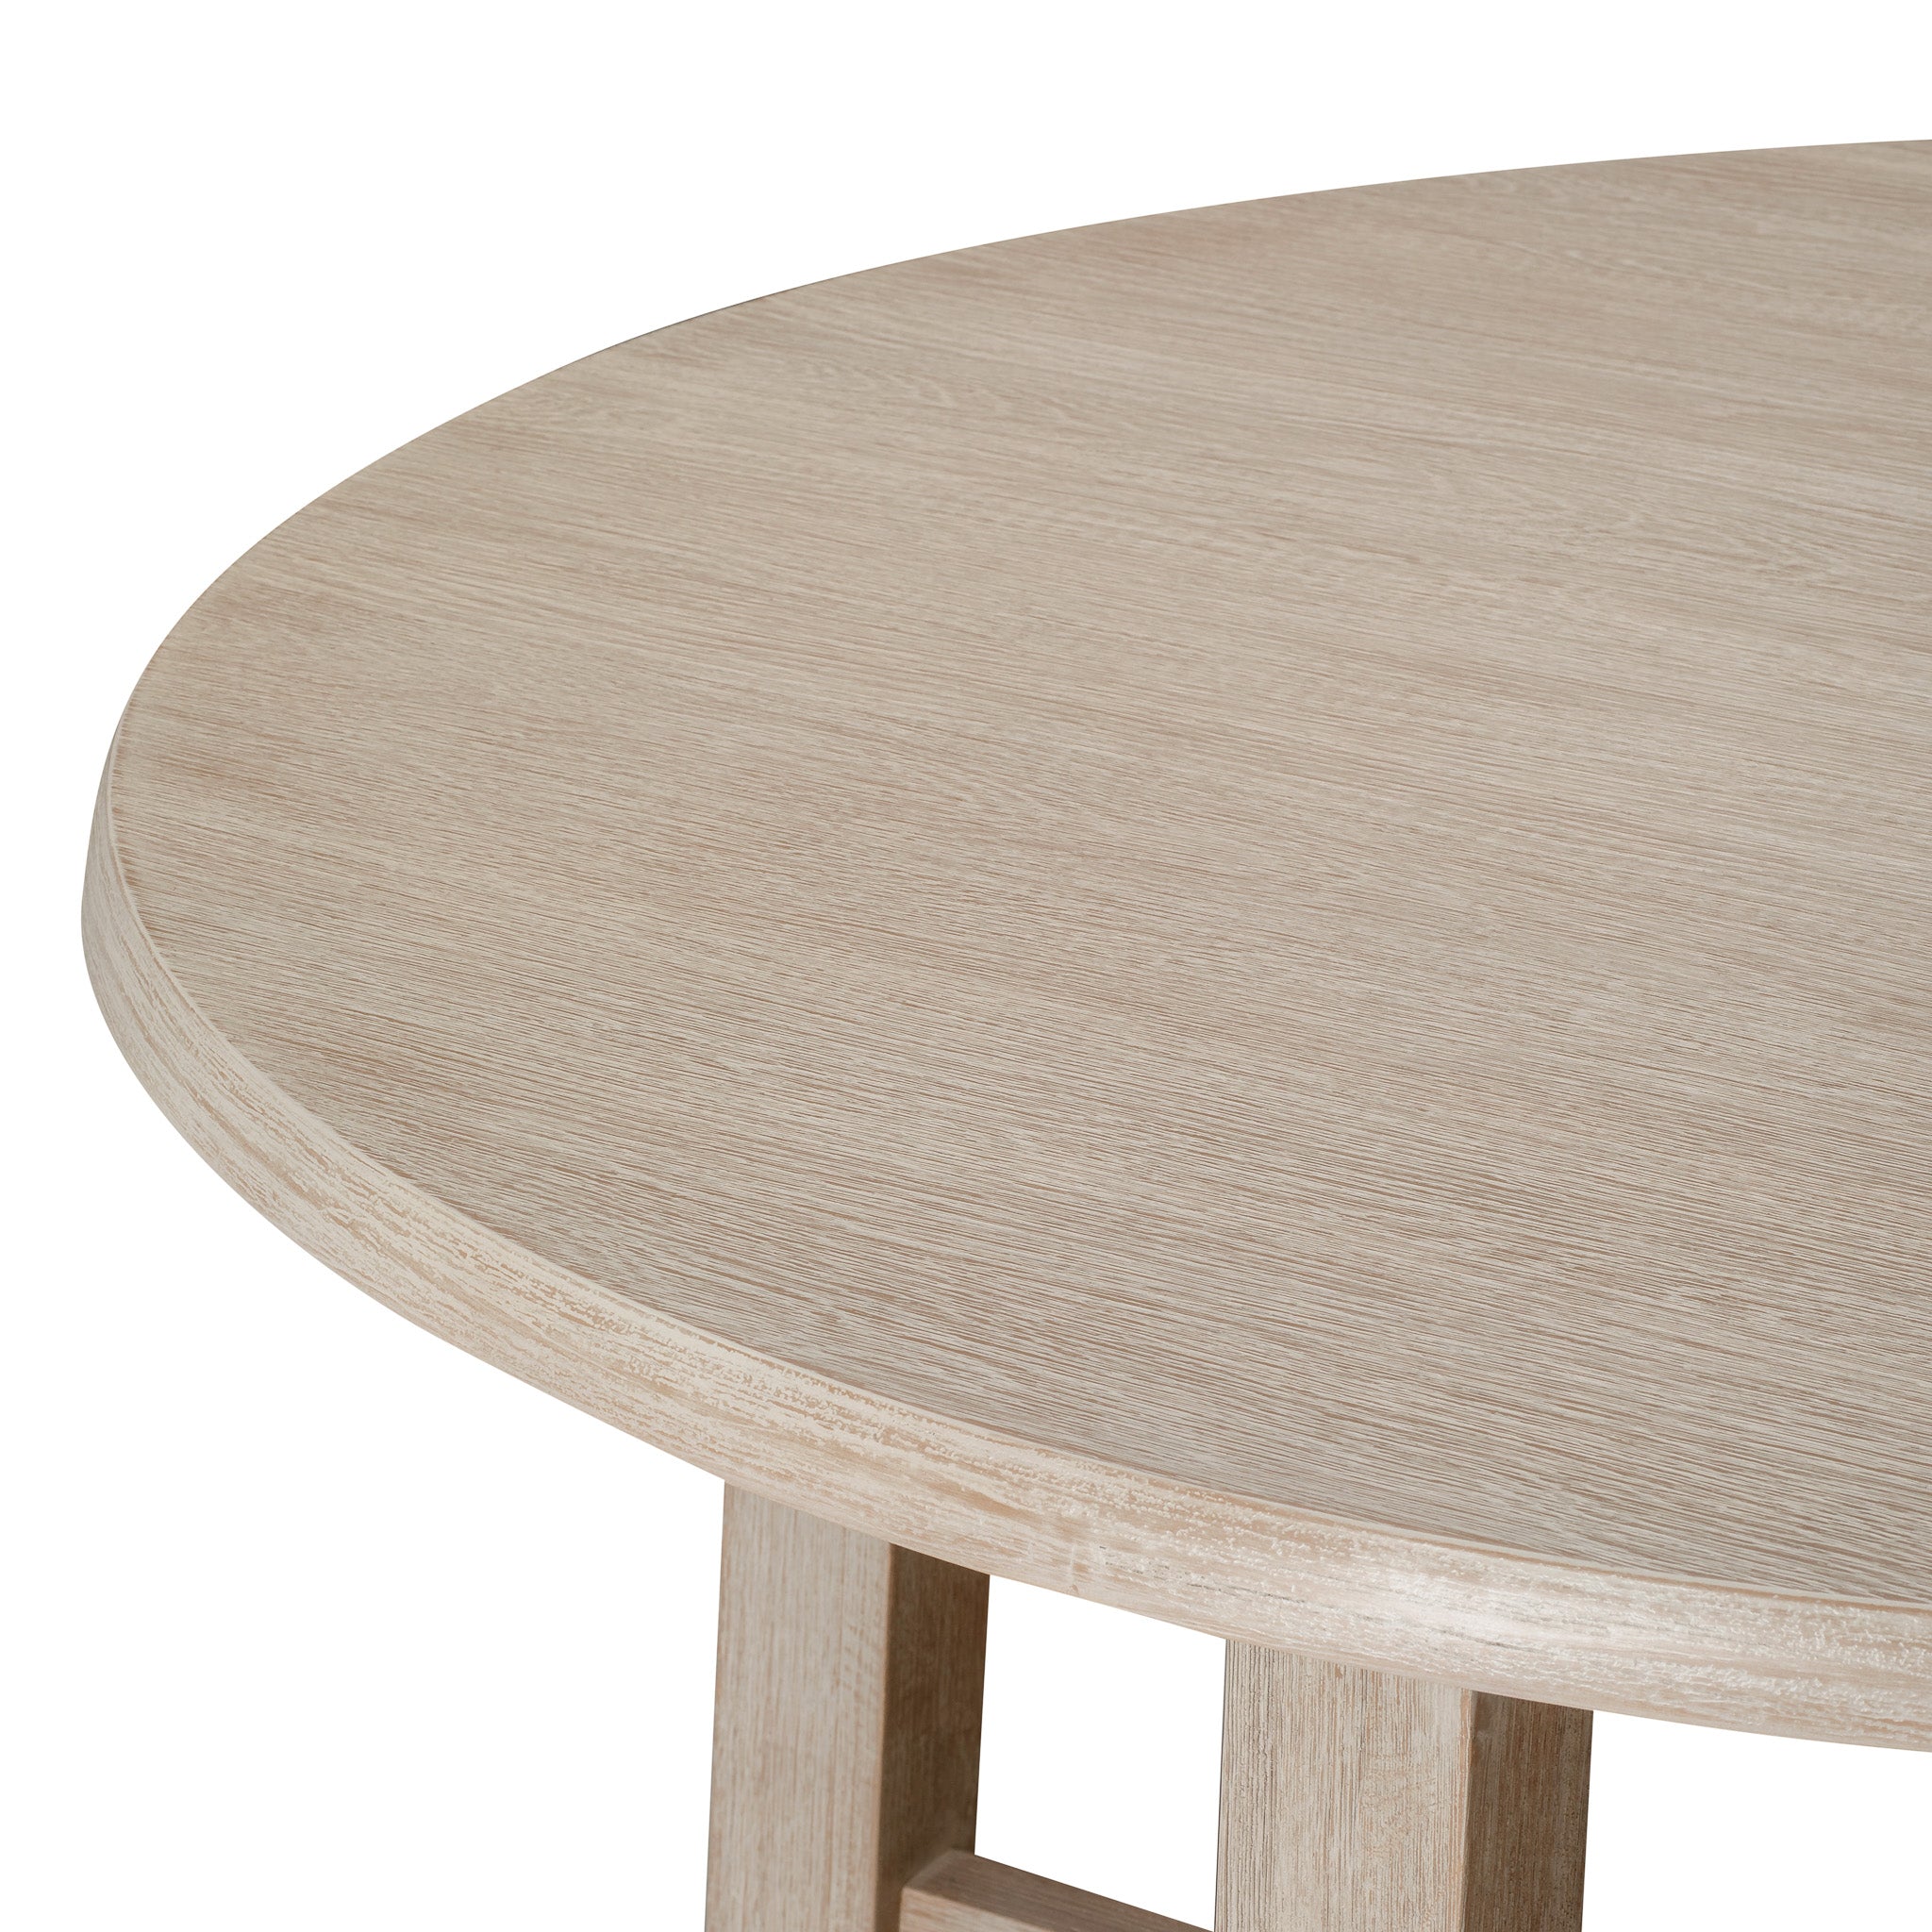 Sasha Organic Round Wooden Dining Table in Weathered White Finish in Dining Furniture by Maven Lane